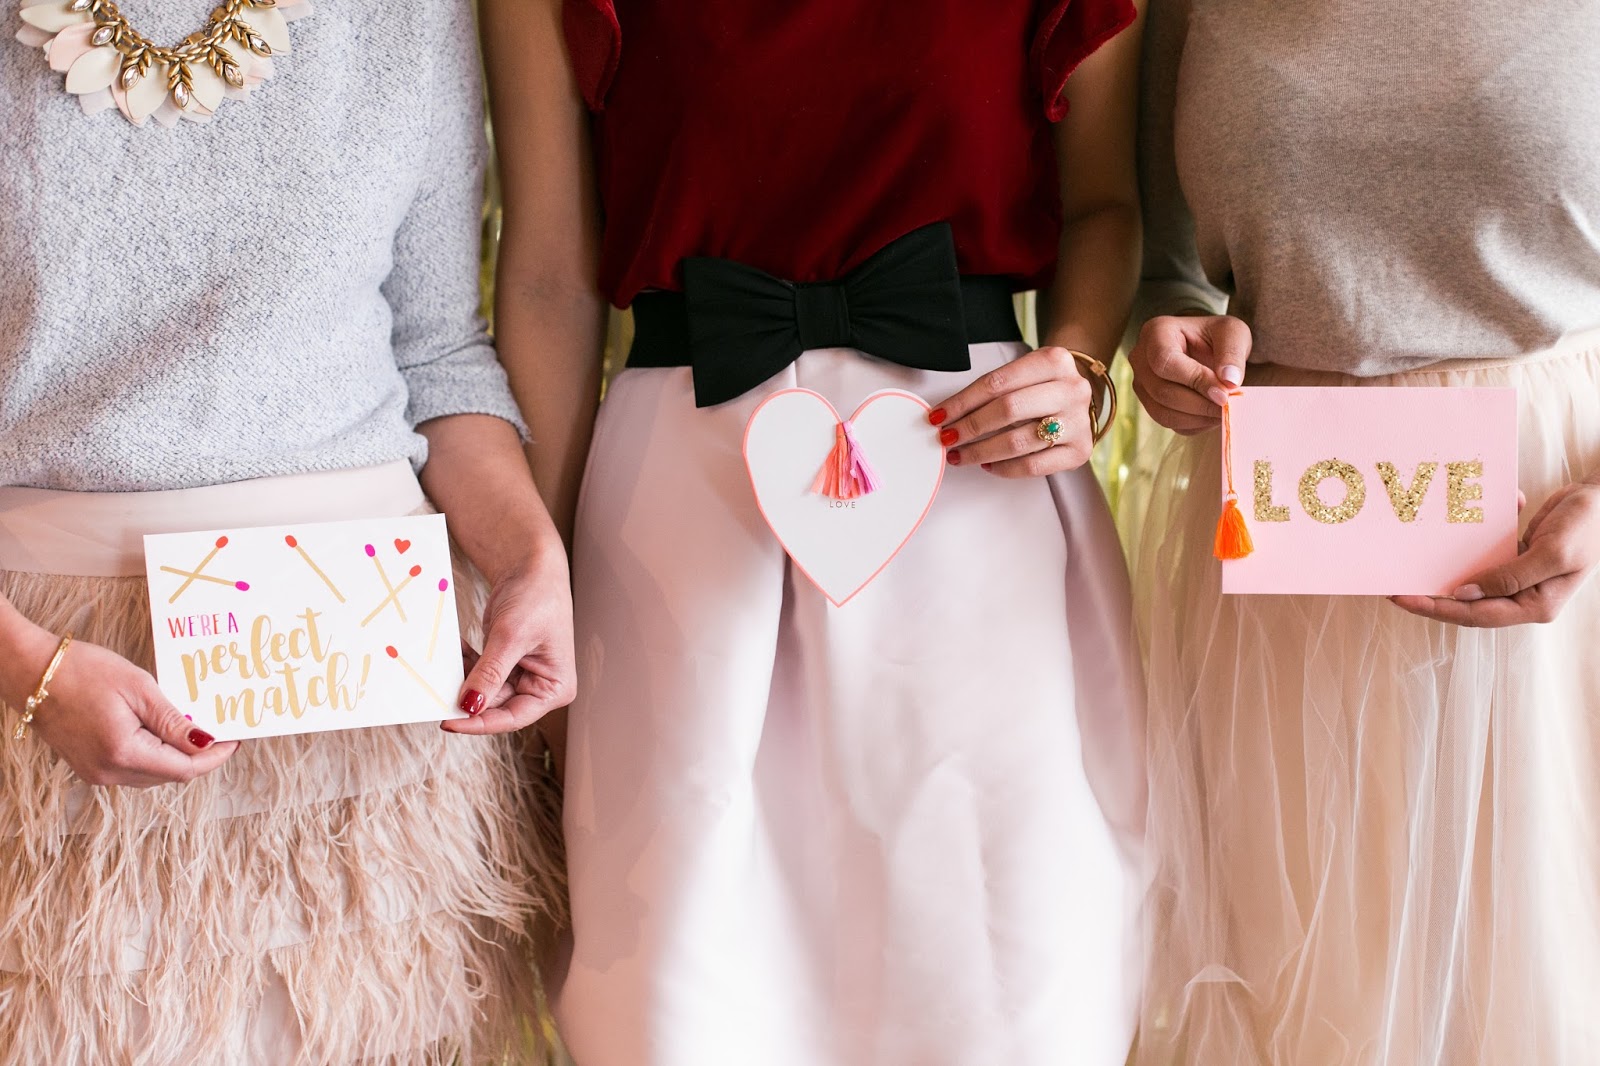 Bijuleni - How to Host The Perfect Galentine's Day Brunch